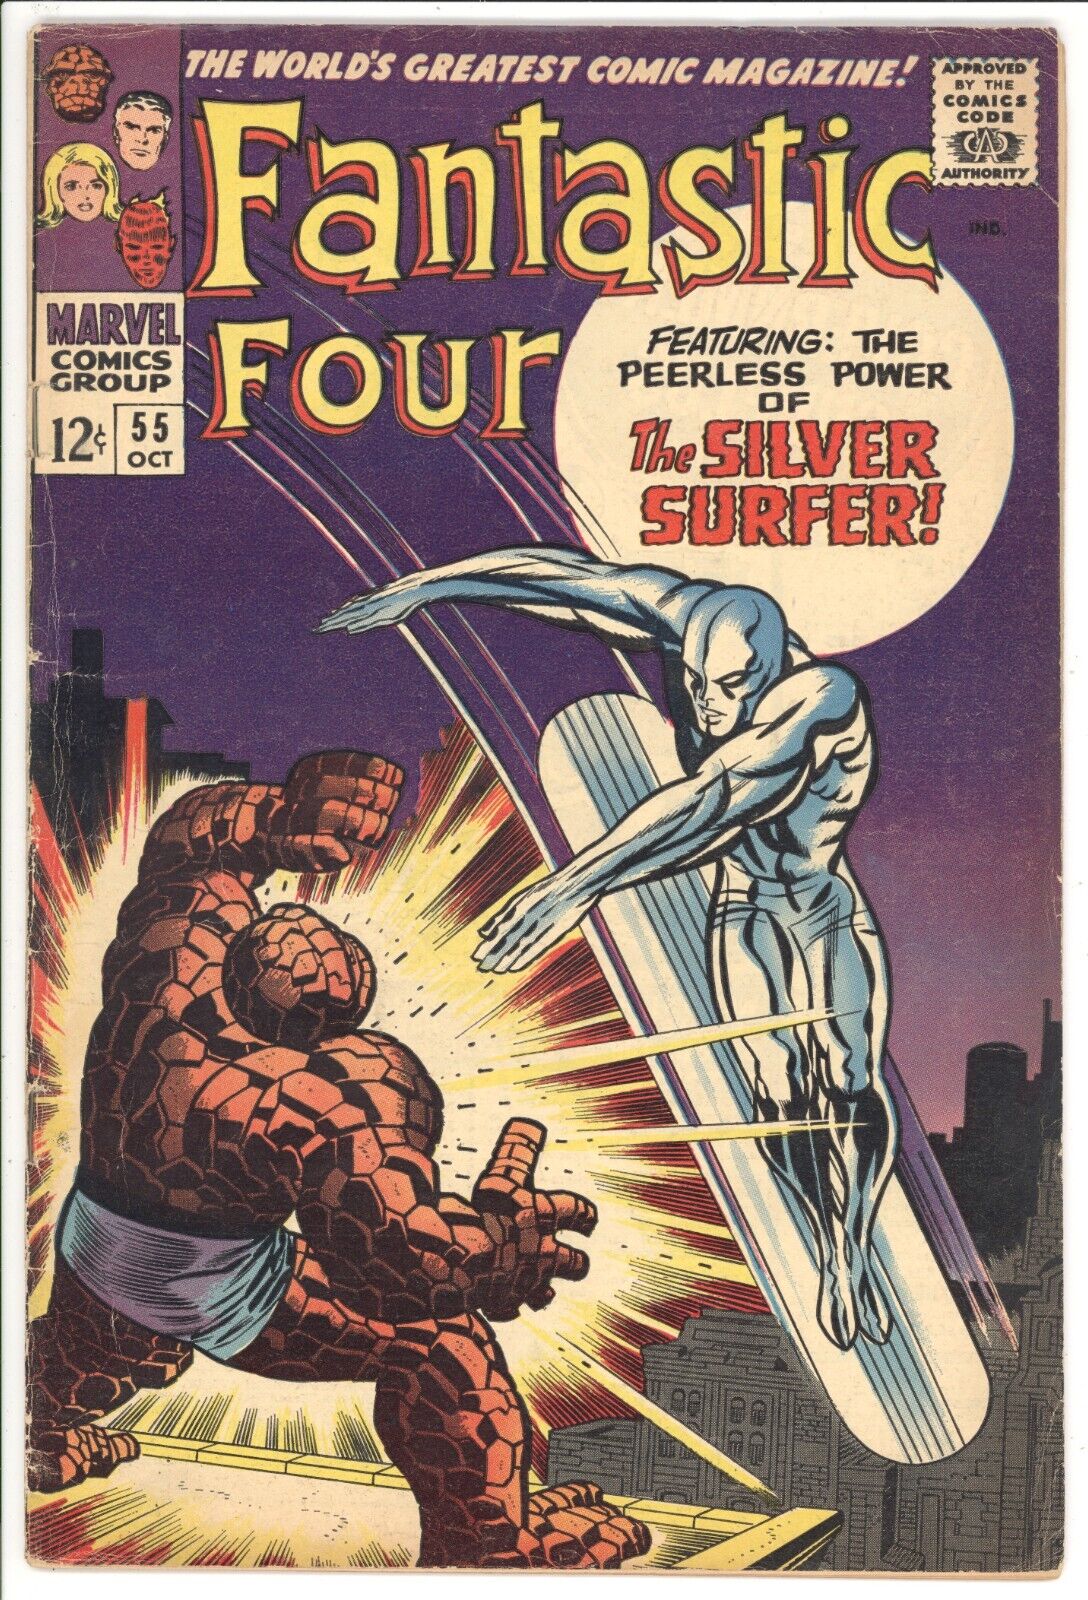 FANTASTIC FOUR  55  VG+/4.5  -  Nice early Silver Surfer cover